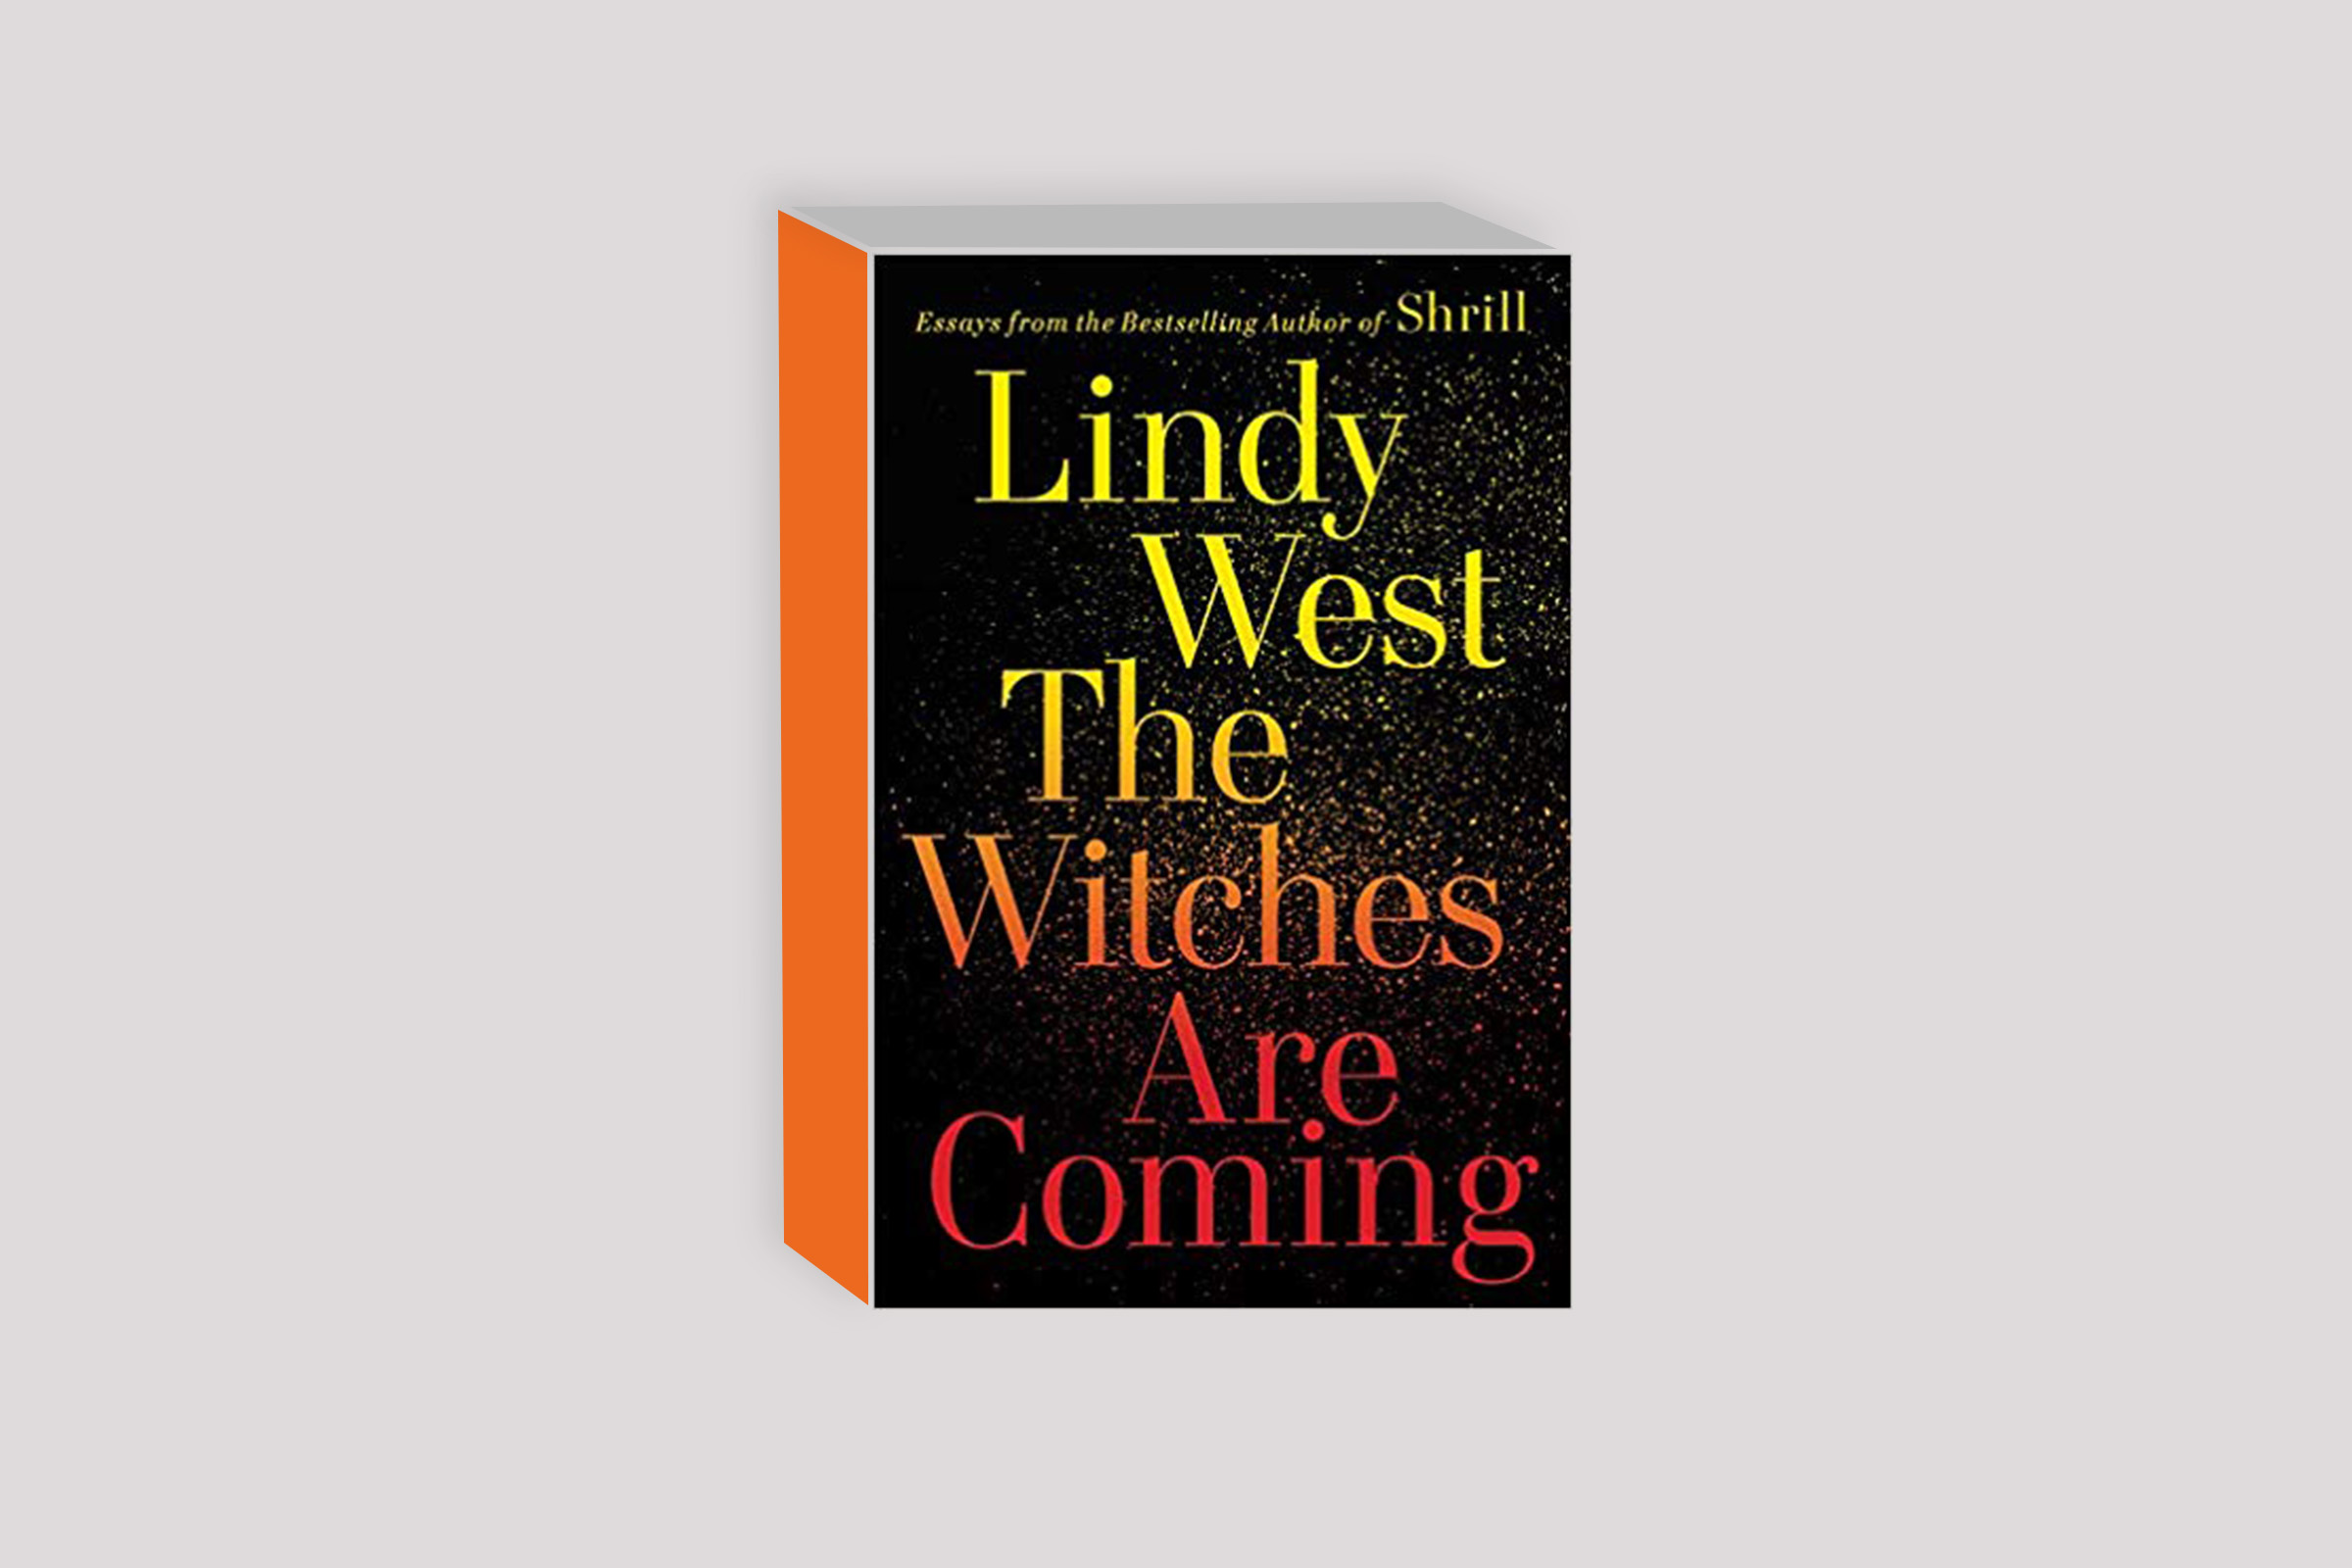 The Witches are Coming